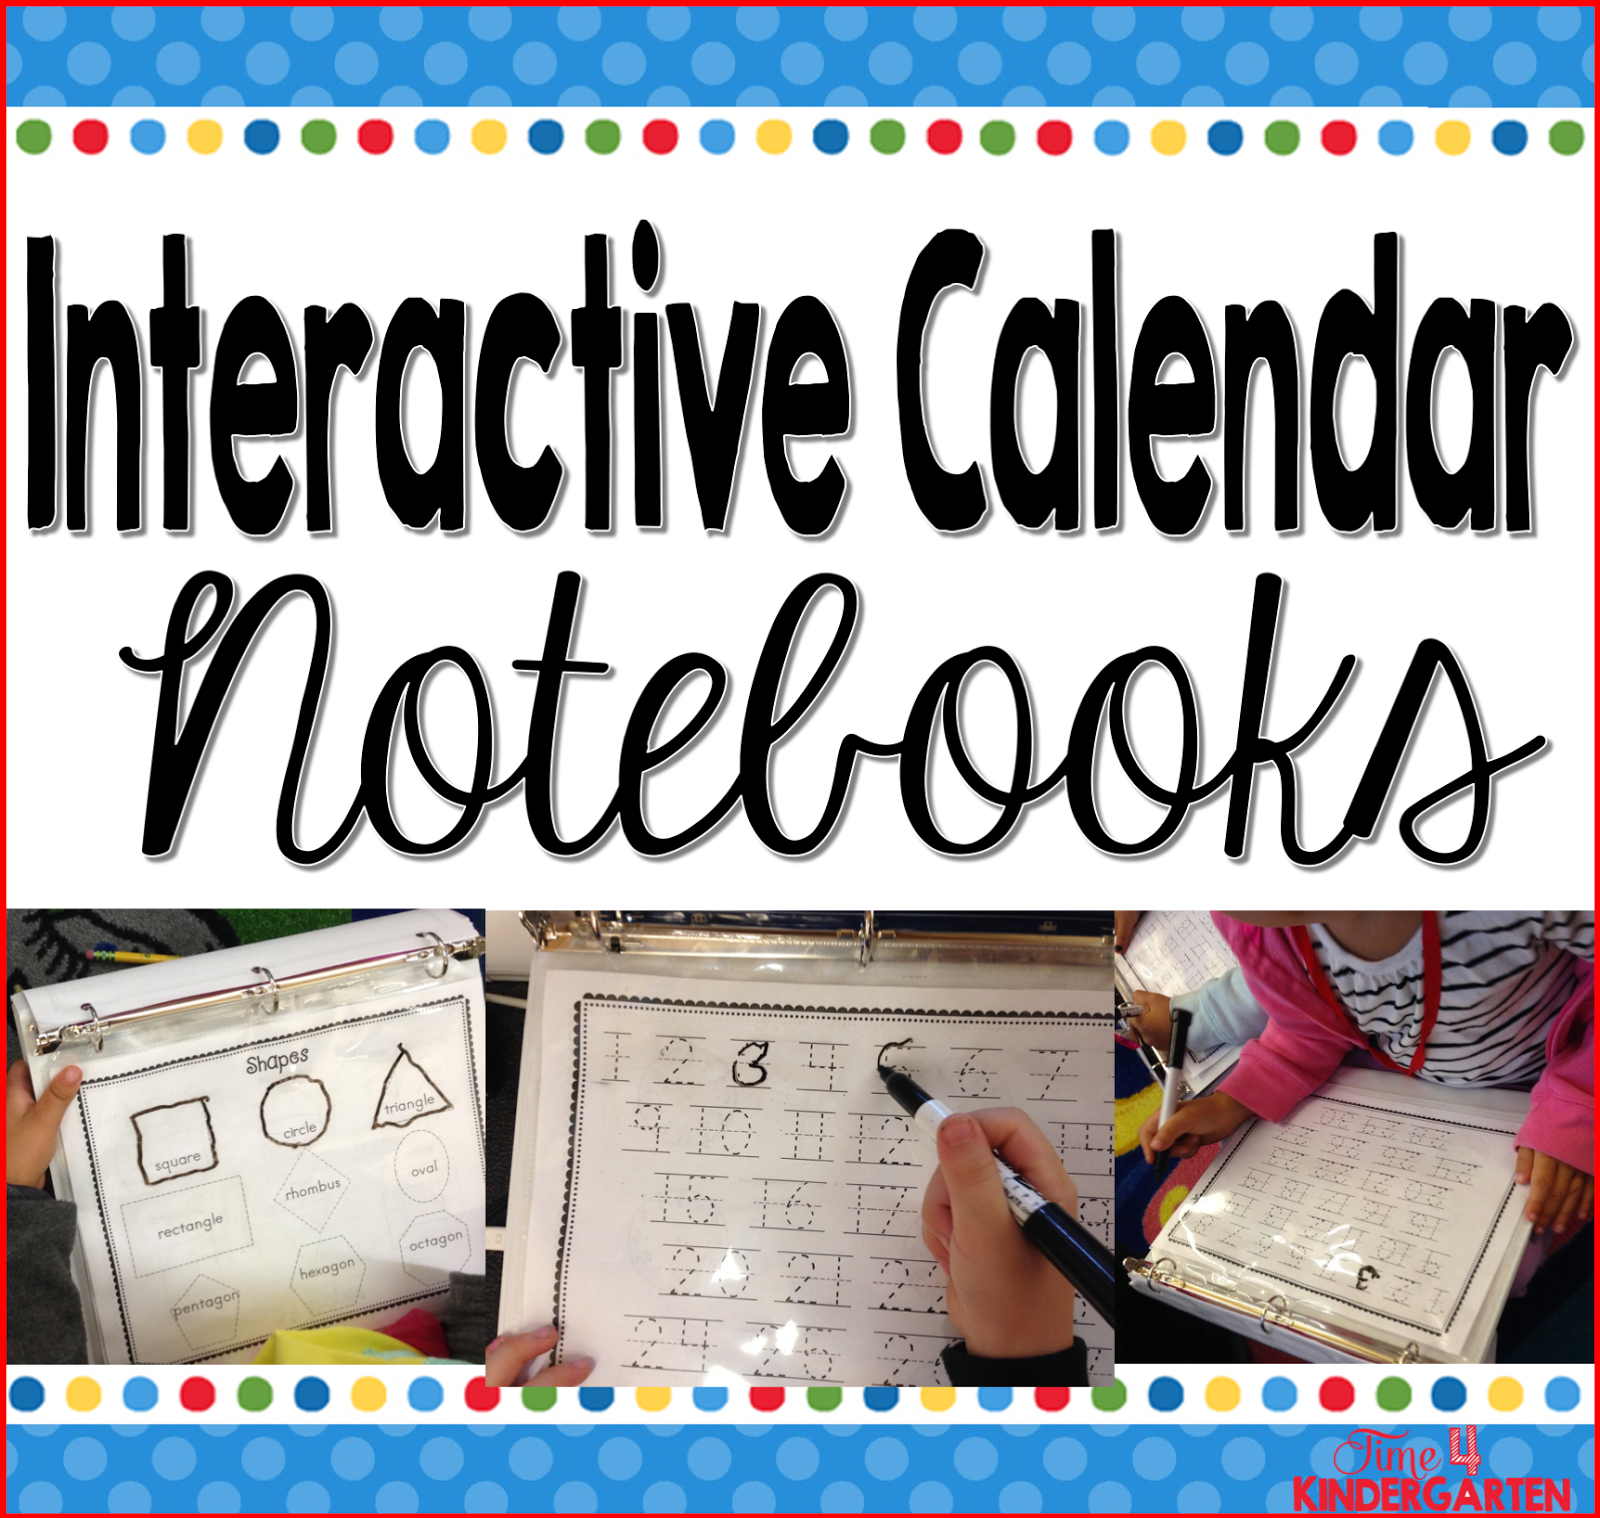 Why You Should Use Interactive Calendar Notebooks | Time 4 Kindergarten